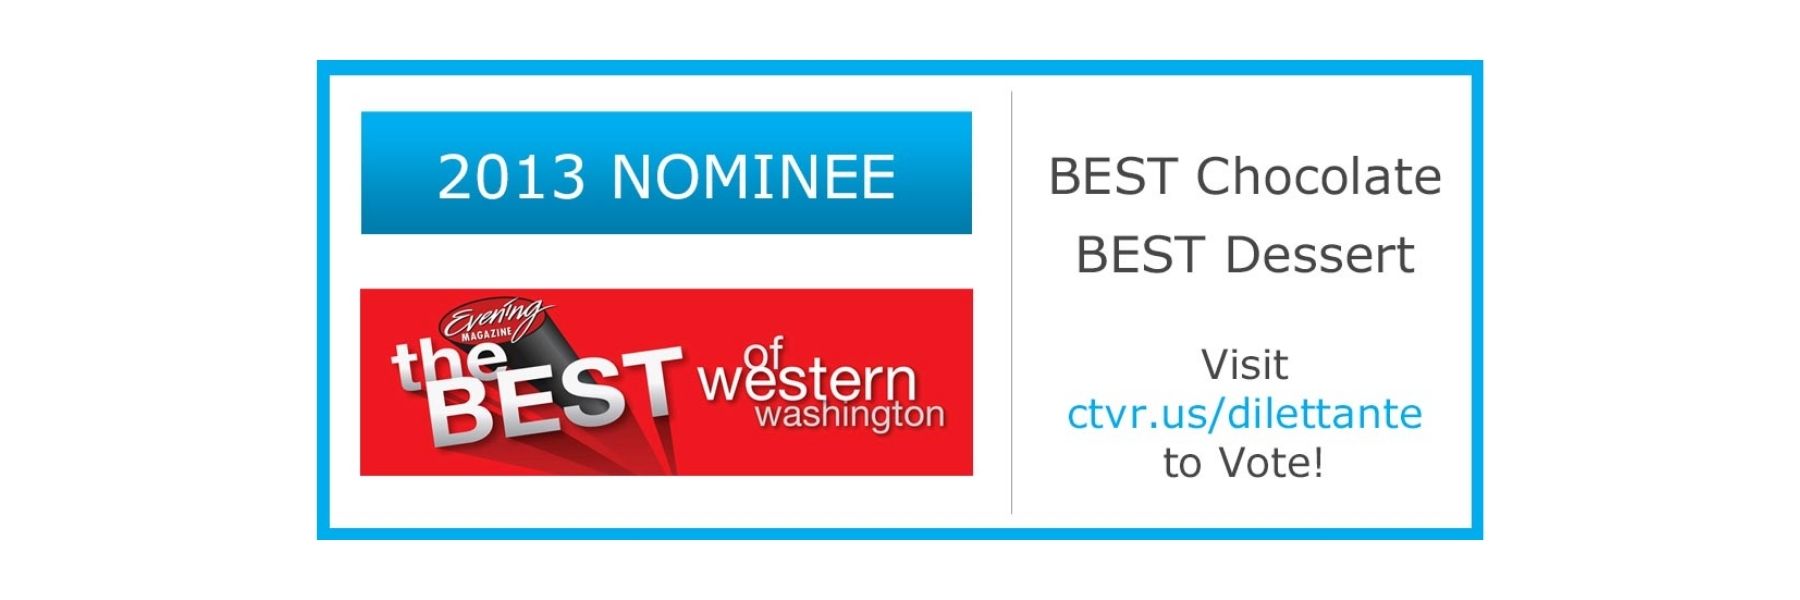 Dilettante Chocolates 2013 Nominee for the Best of Western Washington